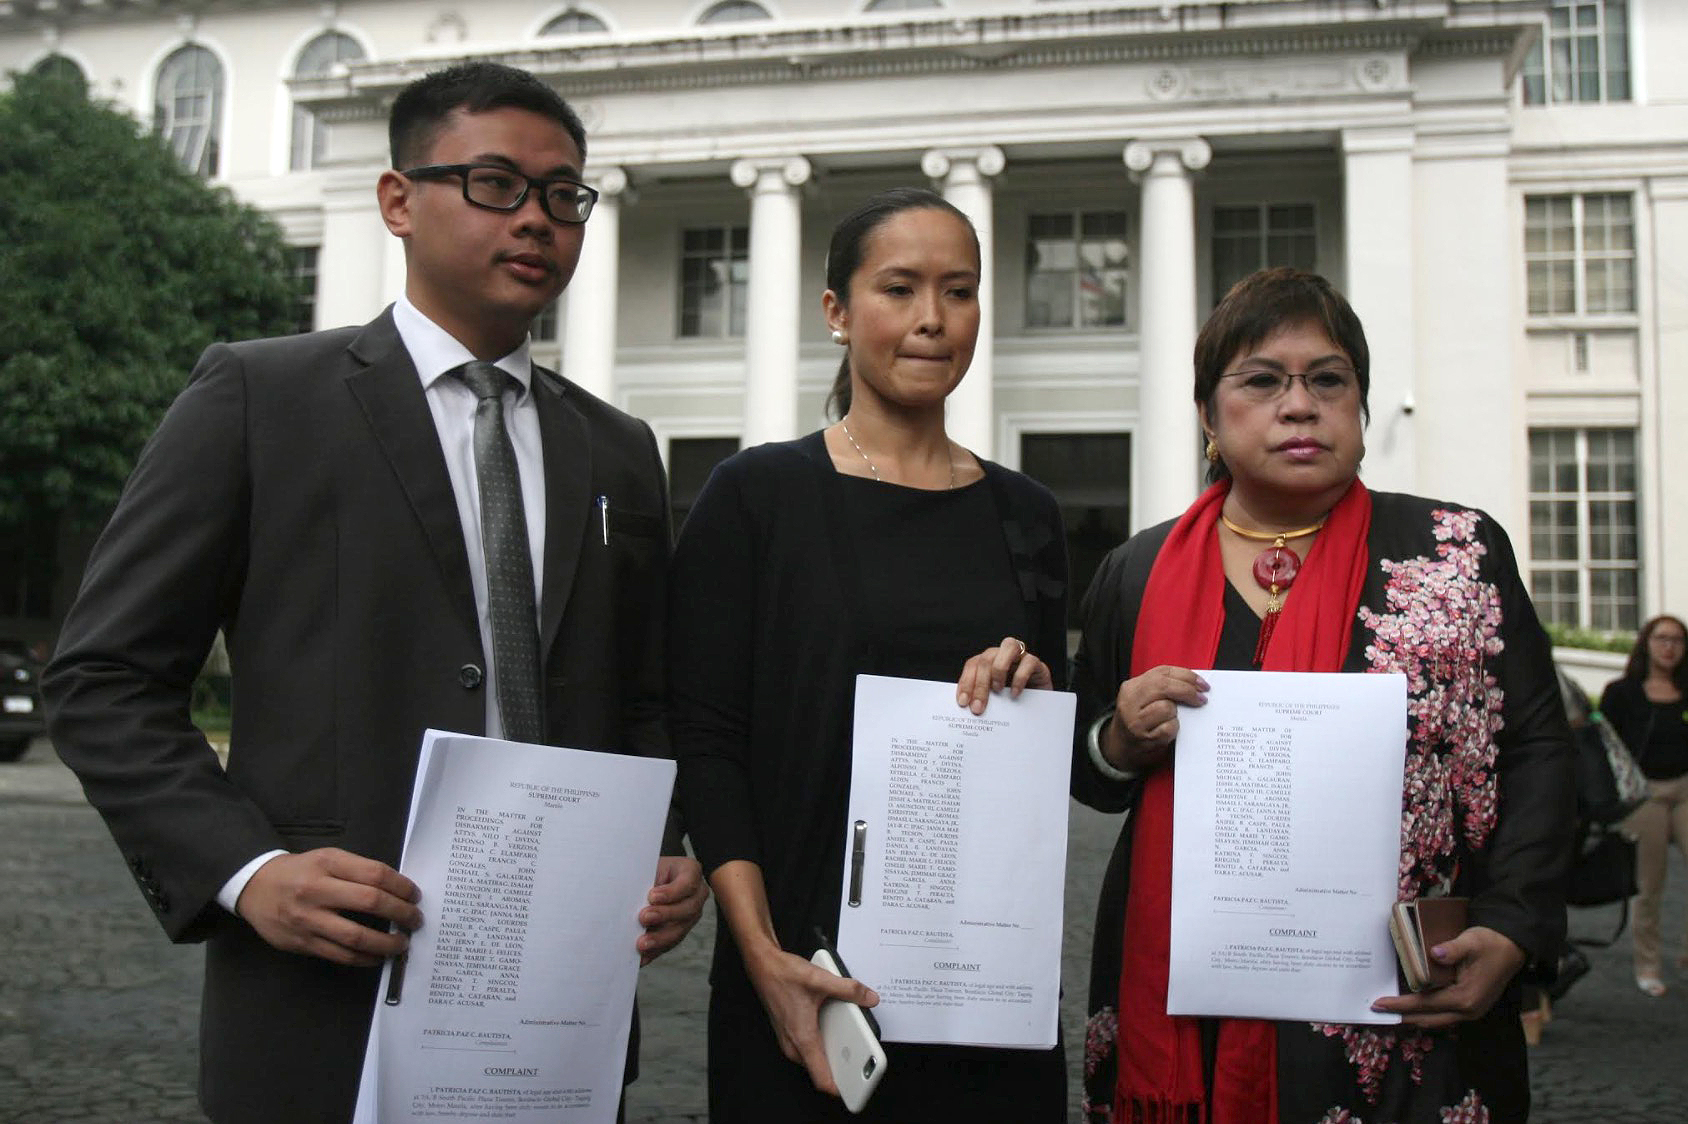 COMPLAINT. Patricia Bautista, estranged wife of COMELEC Chair Andy Bautista, and lawyer Lorna Kapunan file a disbarment complaint before the Supreme Court (SC) against UST Law Dean Nilo Divina and 20 other lawyers from the Divina law firm on September 26, 2017. Photo by Inoue Jaena/Rappler 